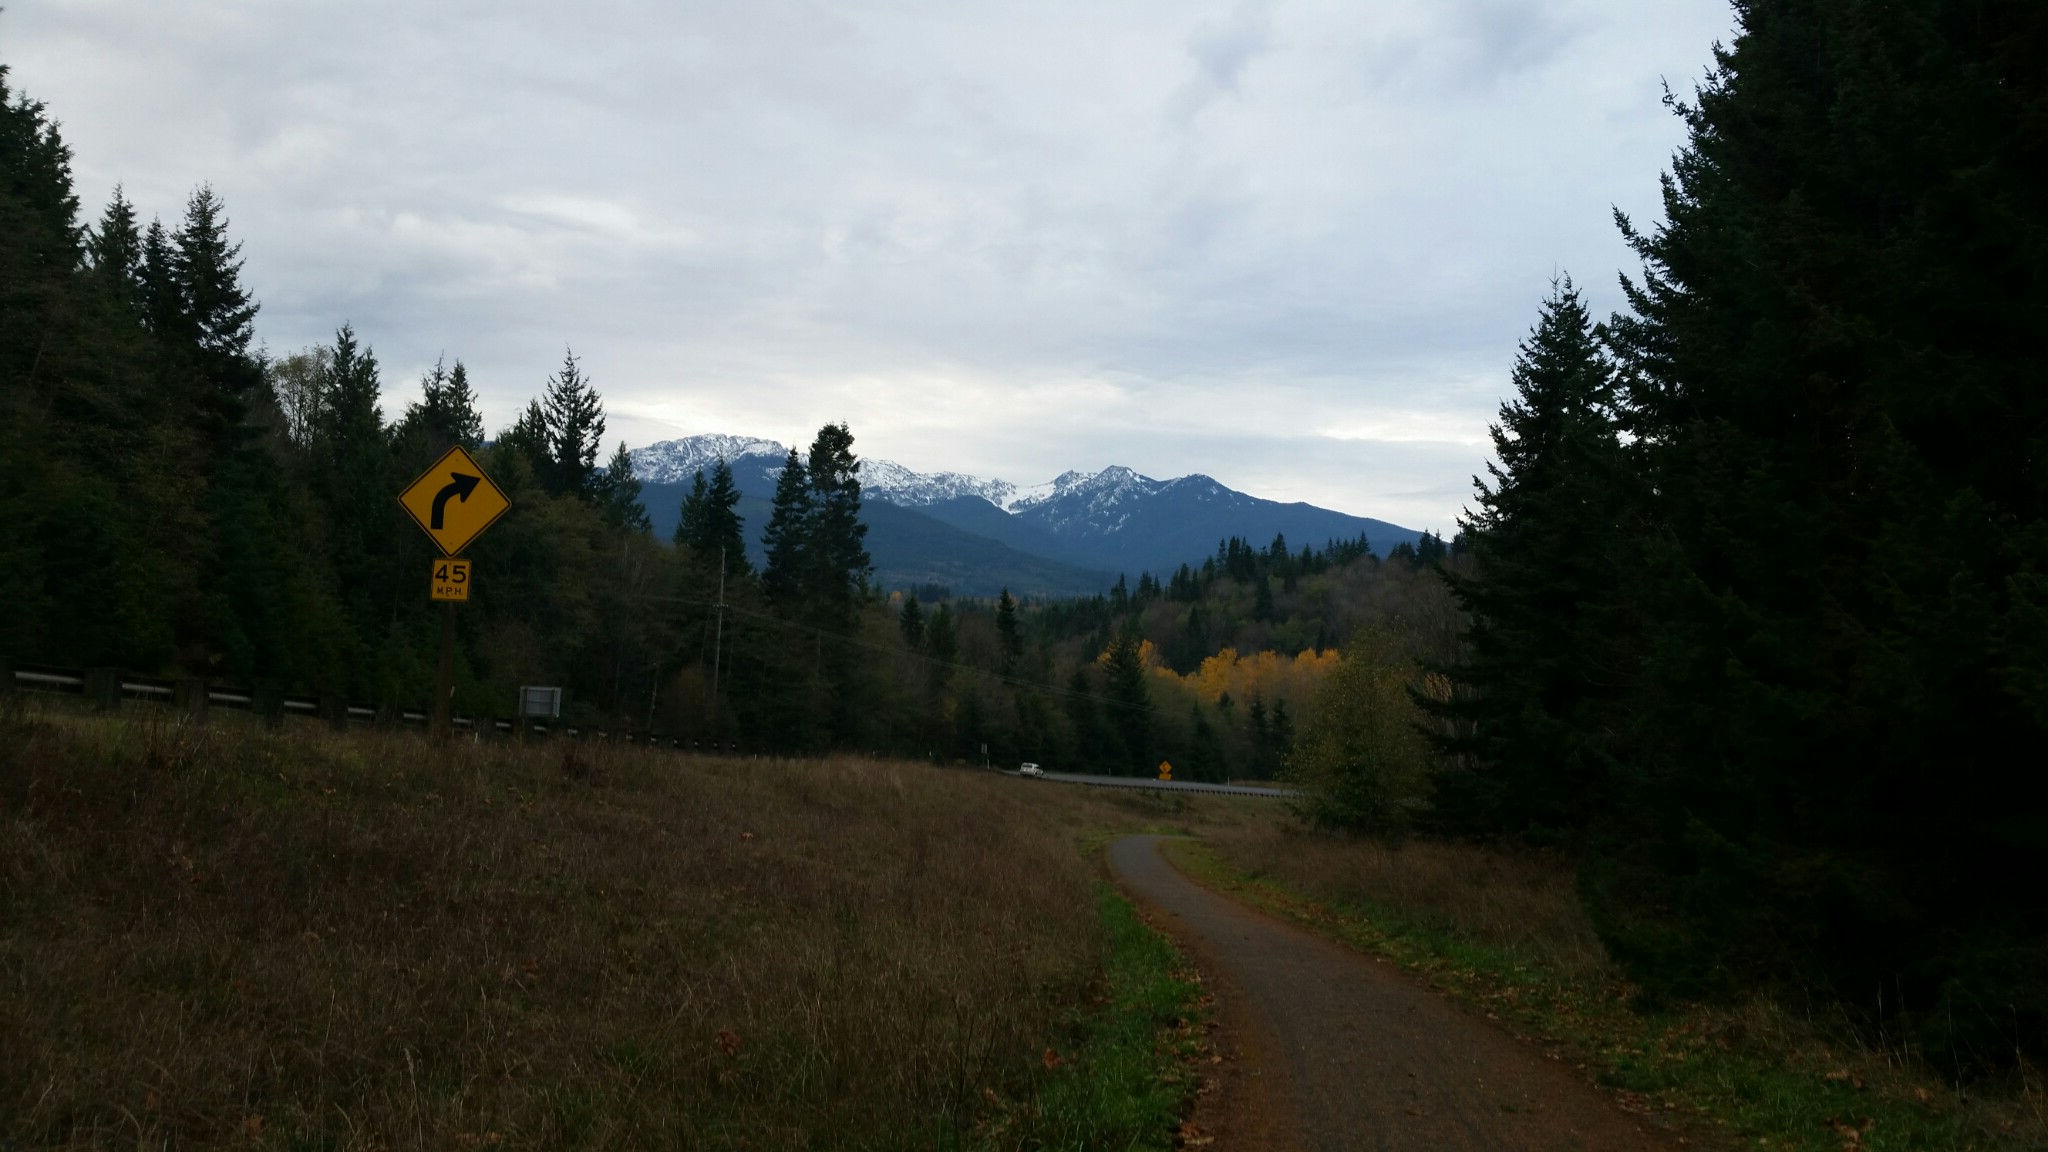 Olympic Discovery Trail on my way to Port Angeles and the bottom of the Hurricane Ridge climb.